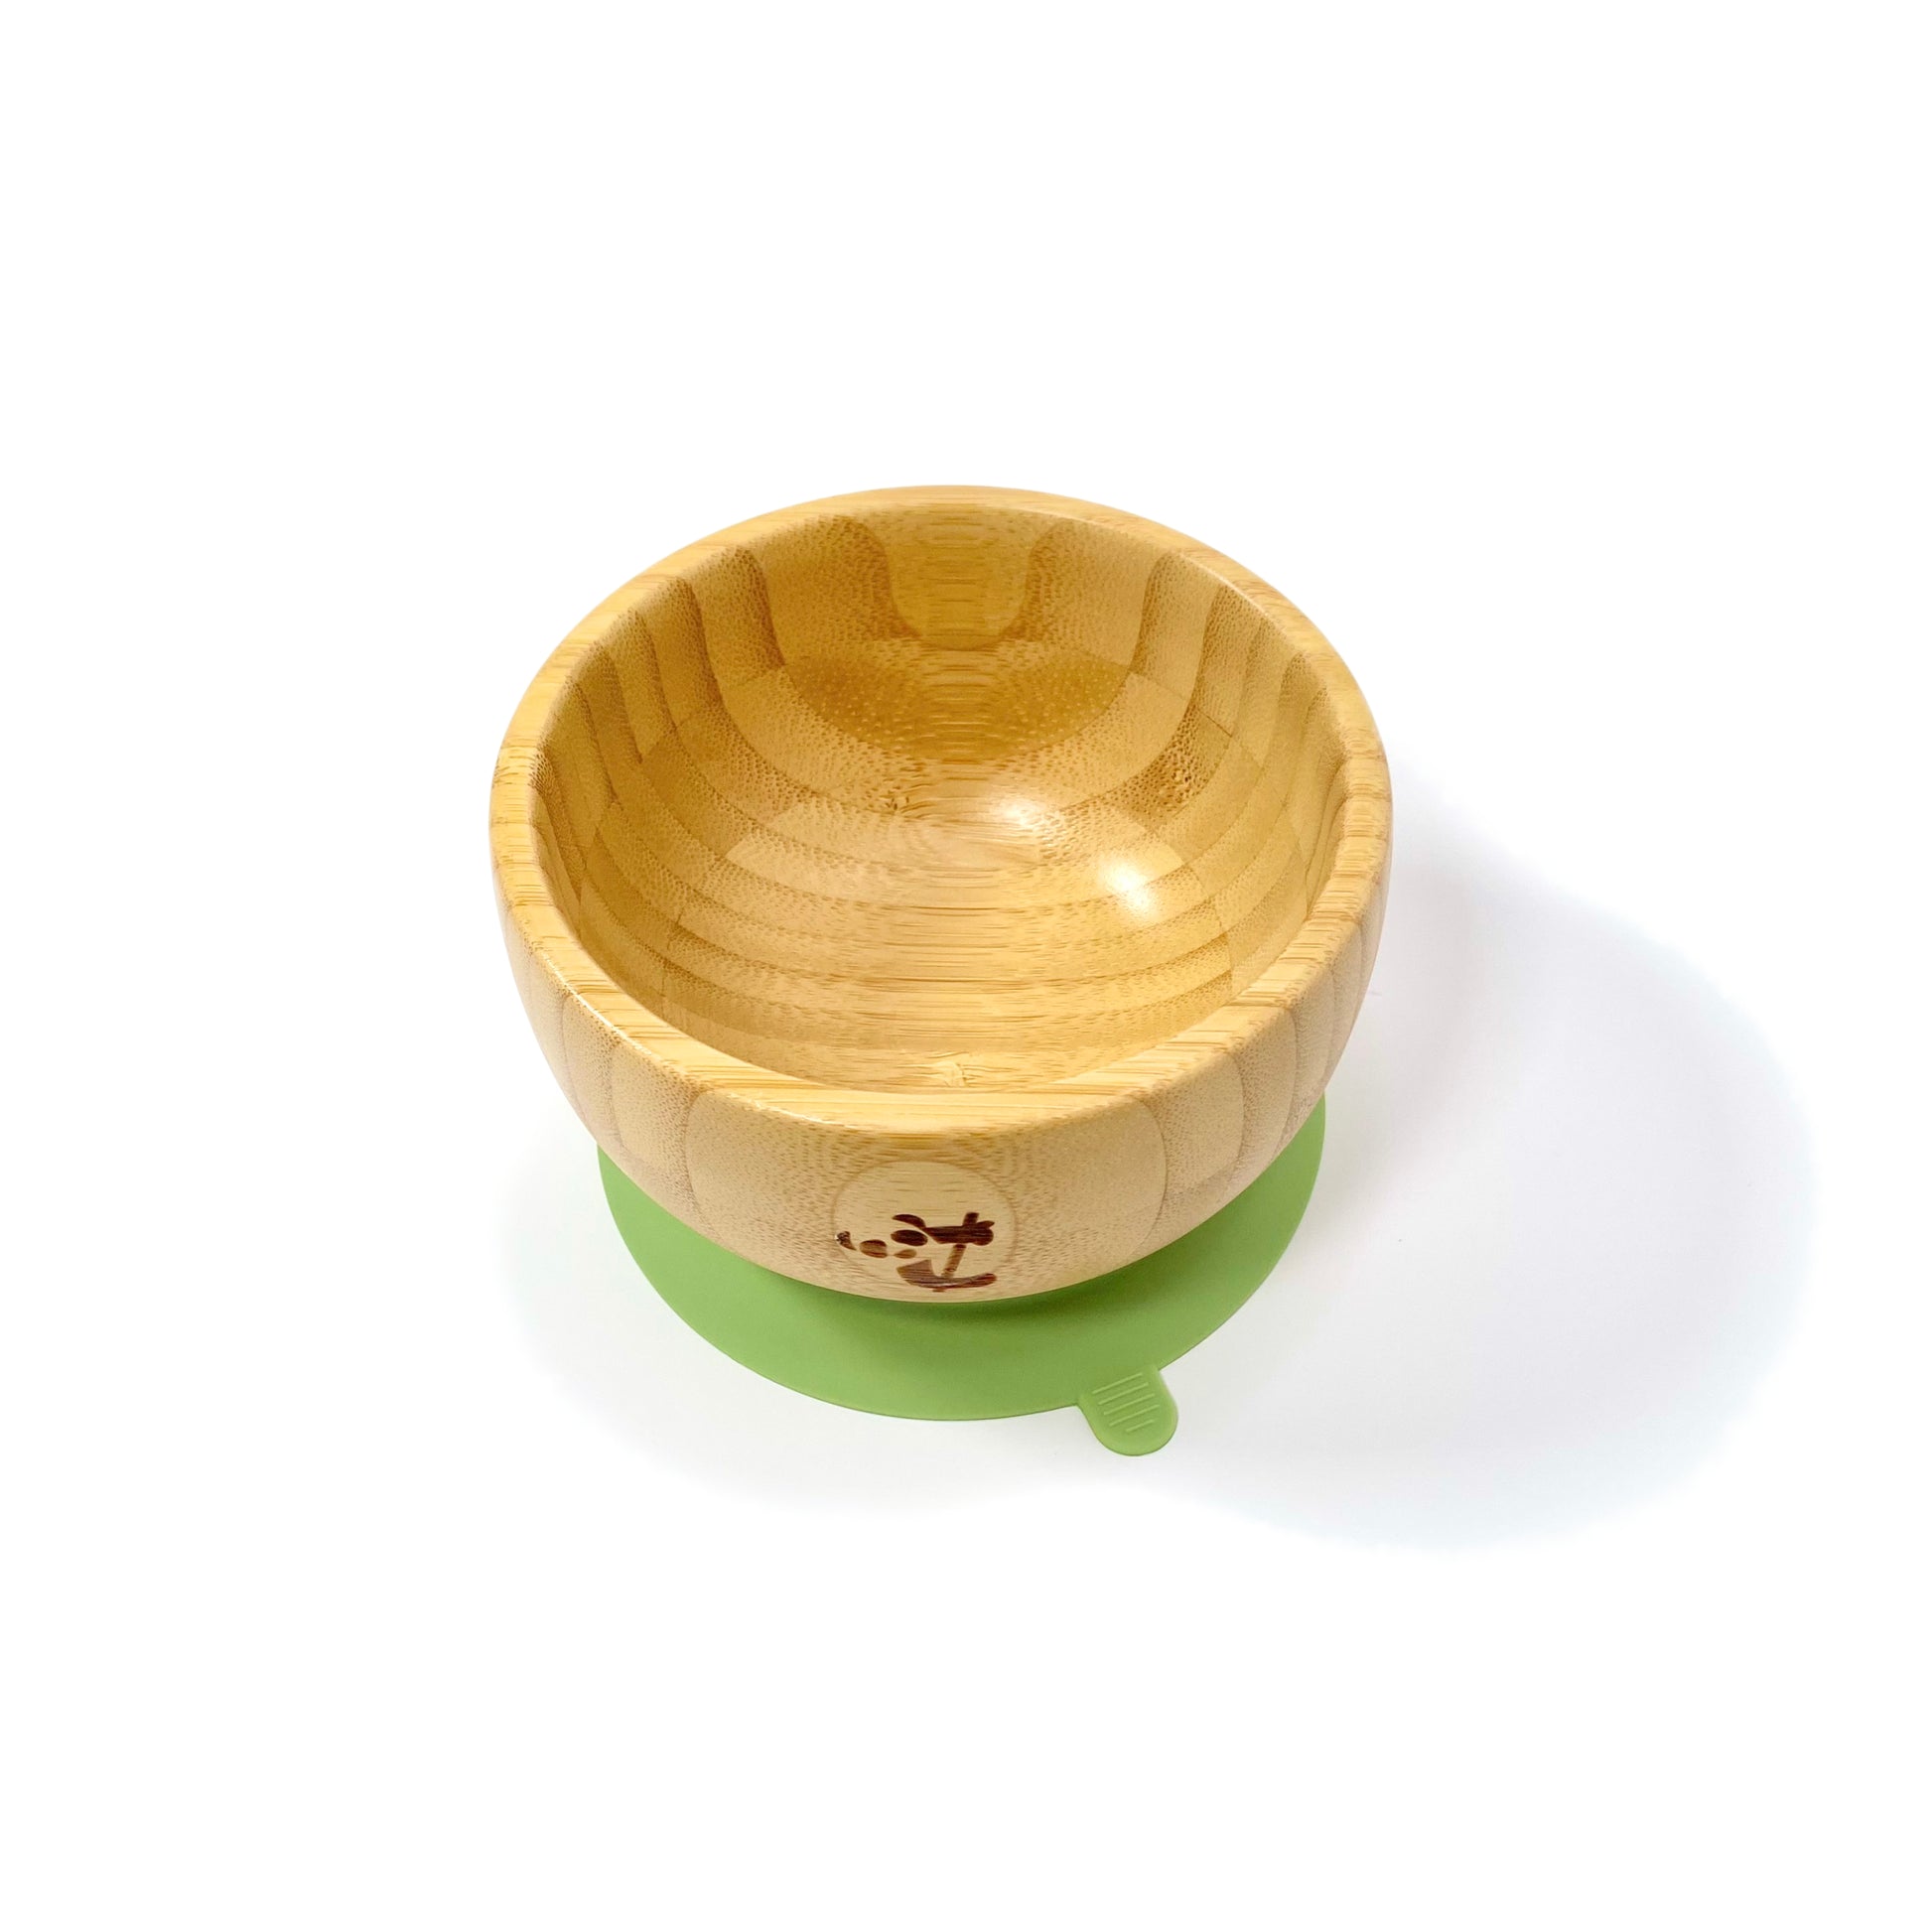 A children’s bamboo bowl with an olive green silicone suction ring.